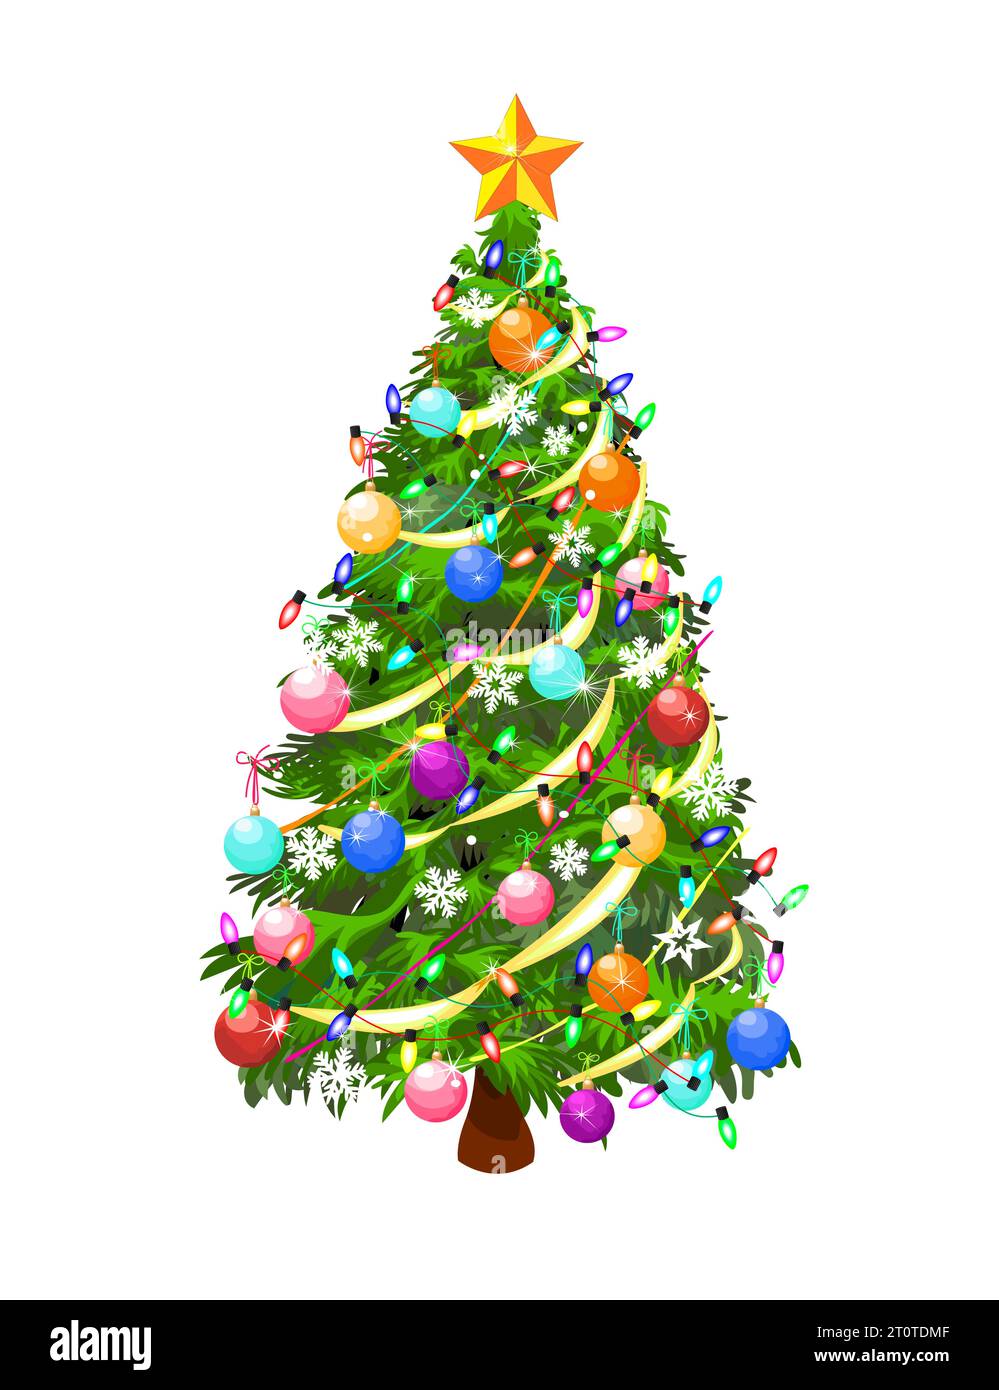 Christmas tree decorated with garlands, balls, and snowflakes, on a white background. Stock Vector